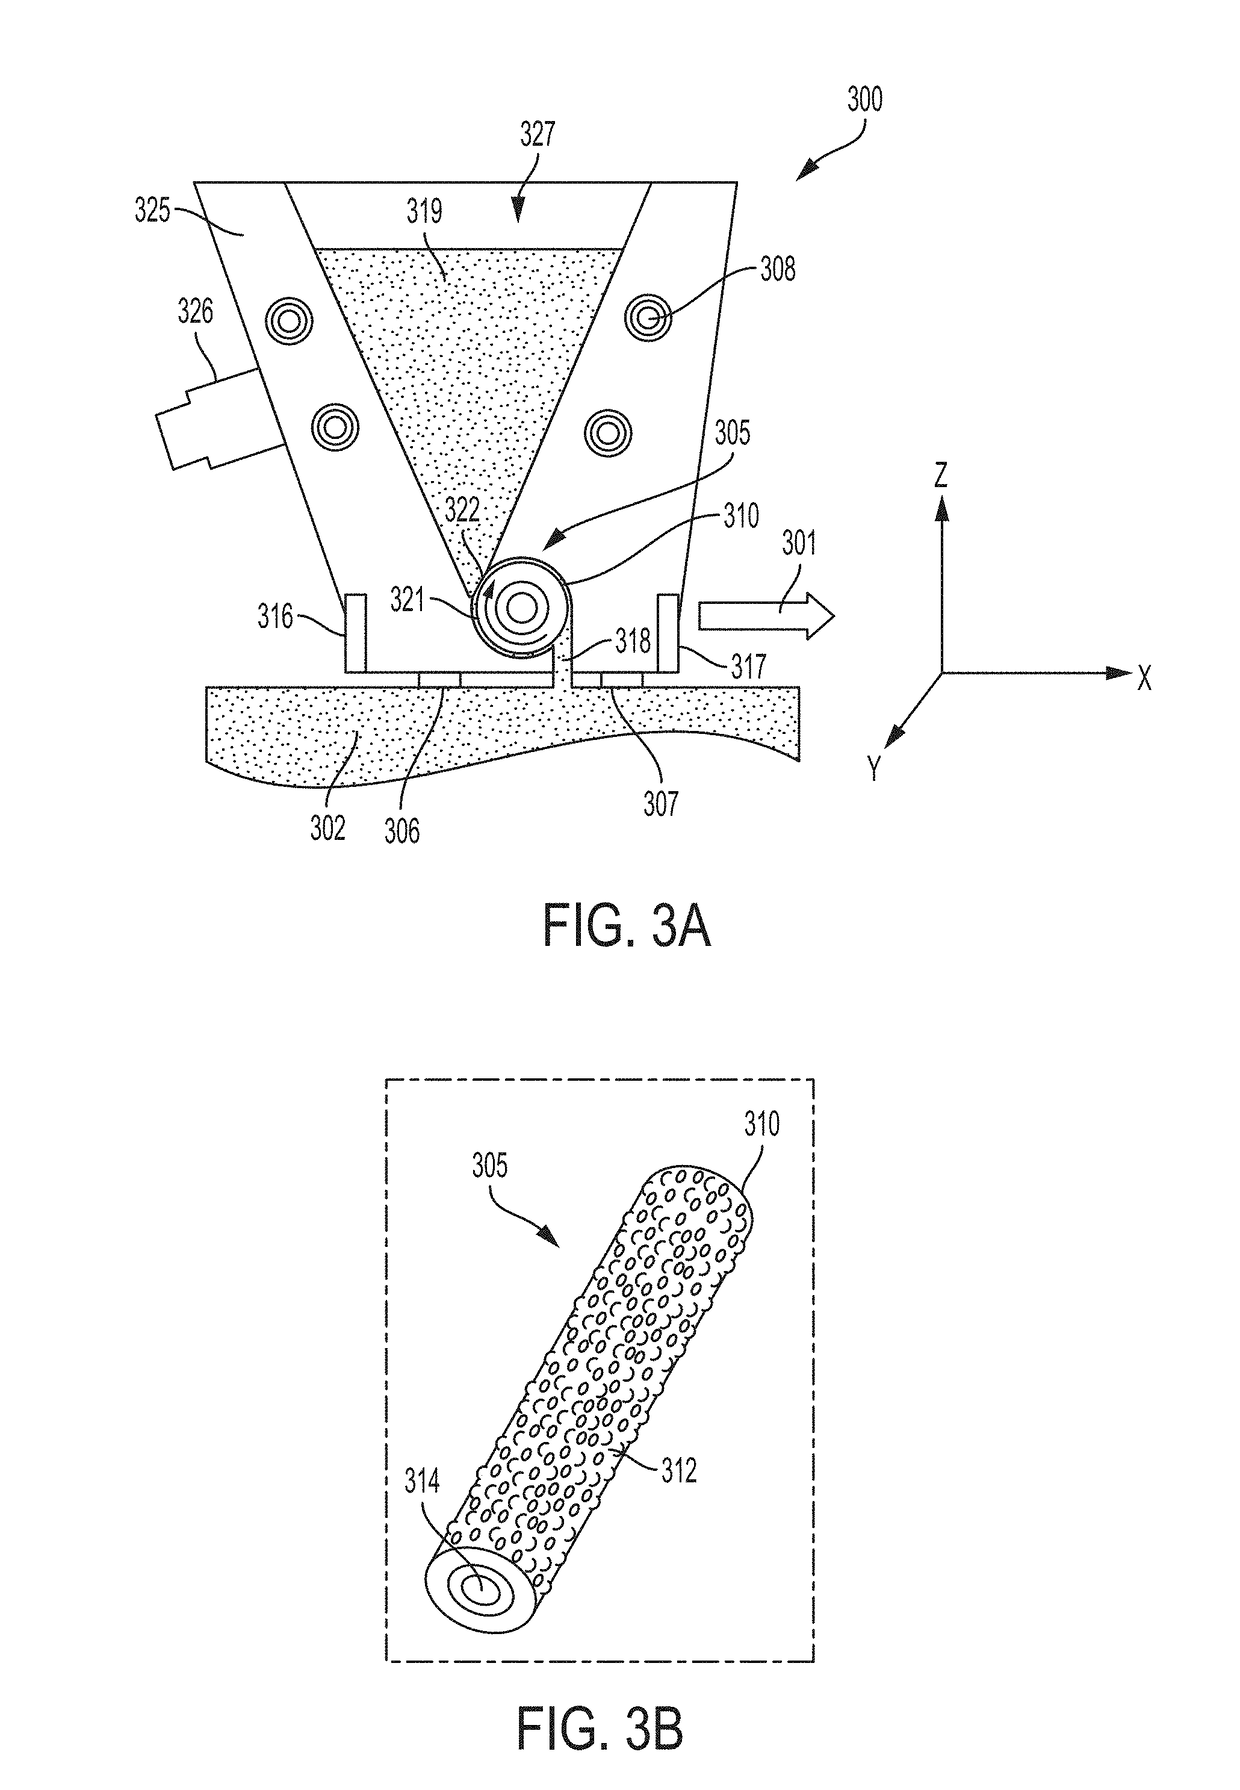 Powder bed re-coater apparatus and methods of use thereof